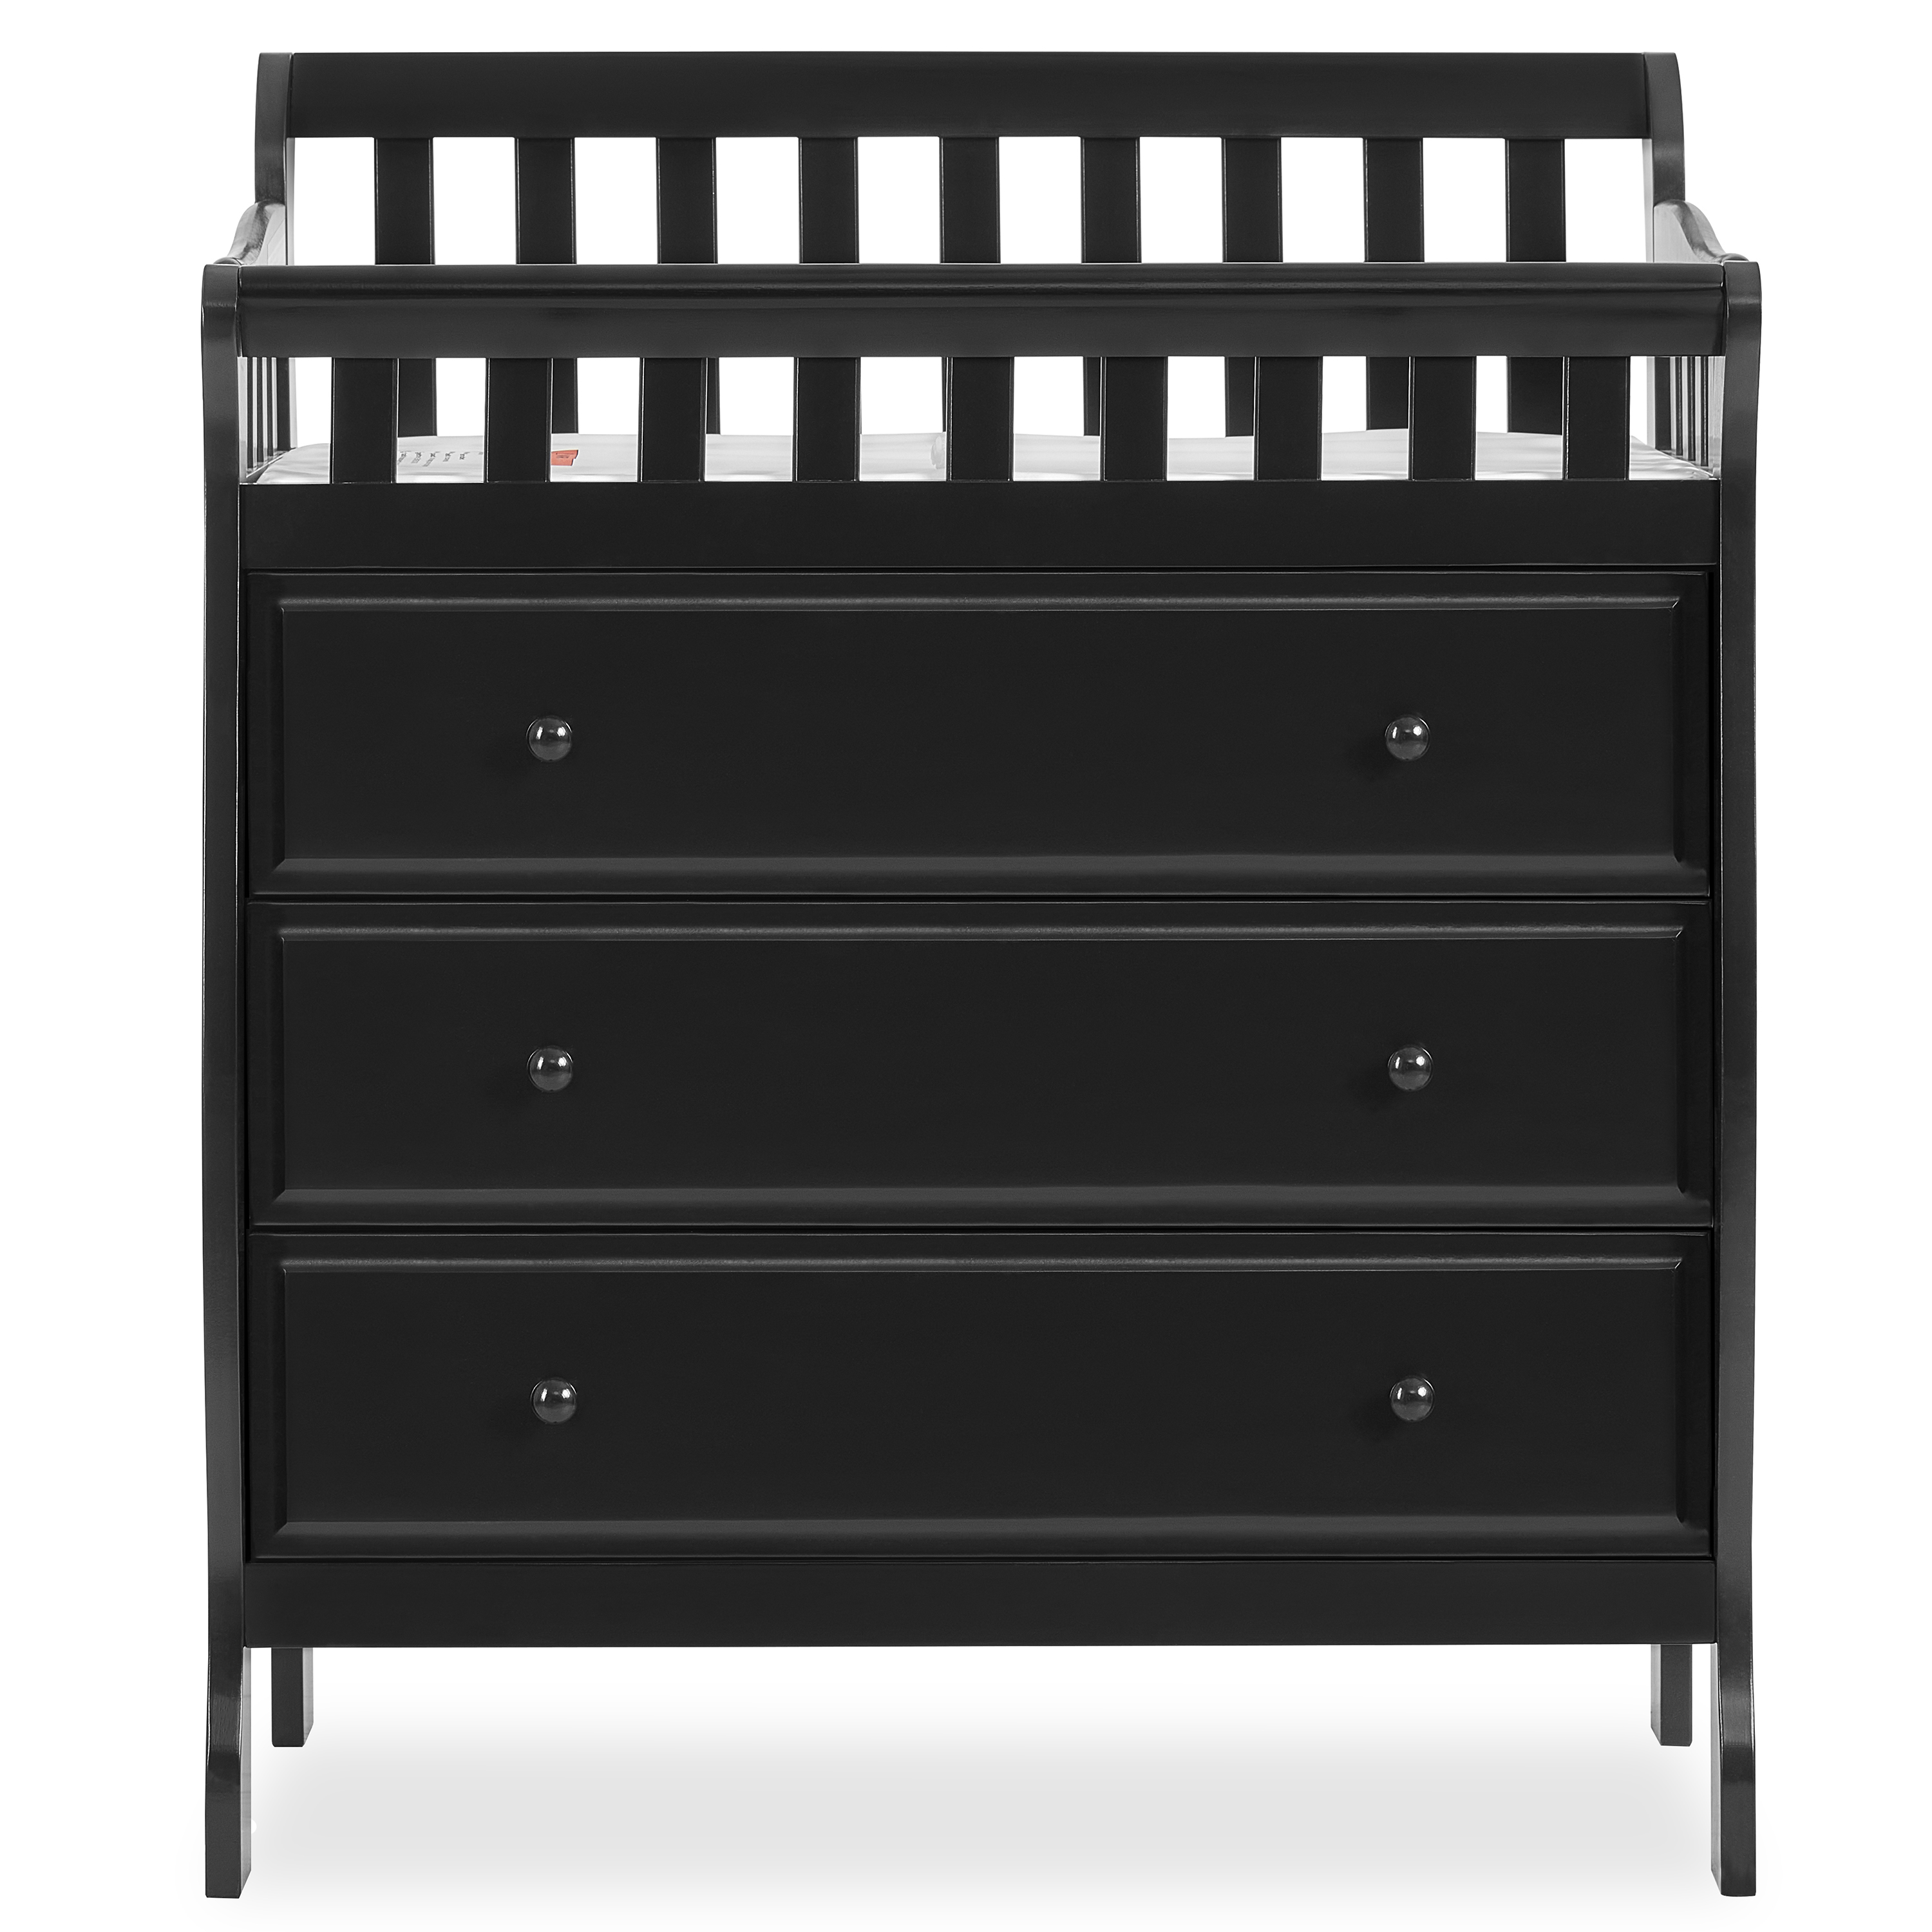 Dream On Me Marcus Changing Table And Dresser, Black - image 2 of 10